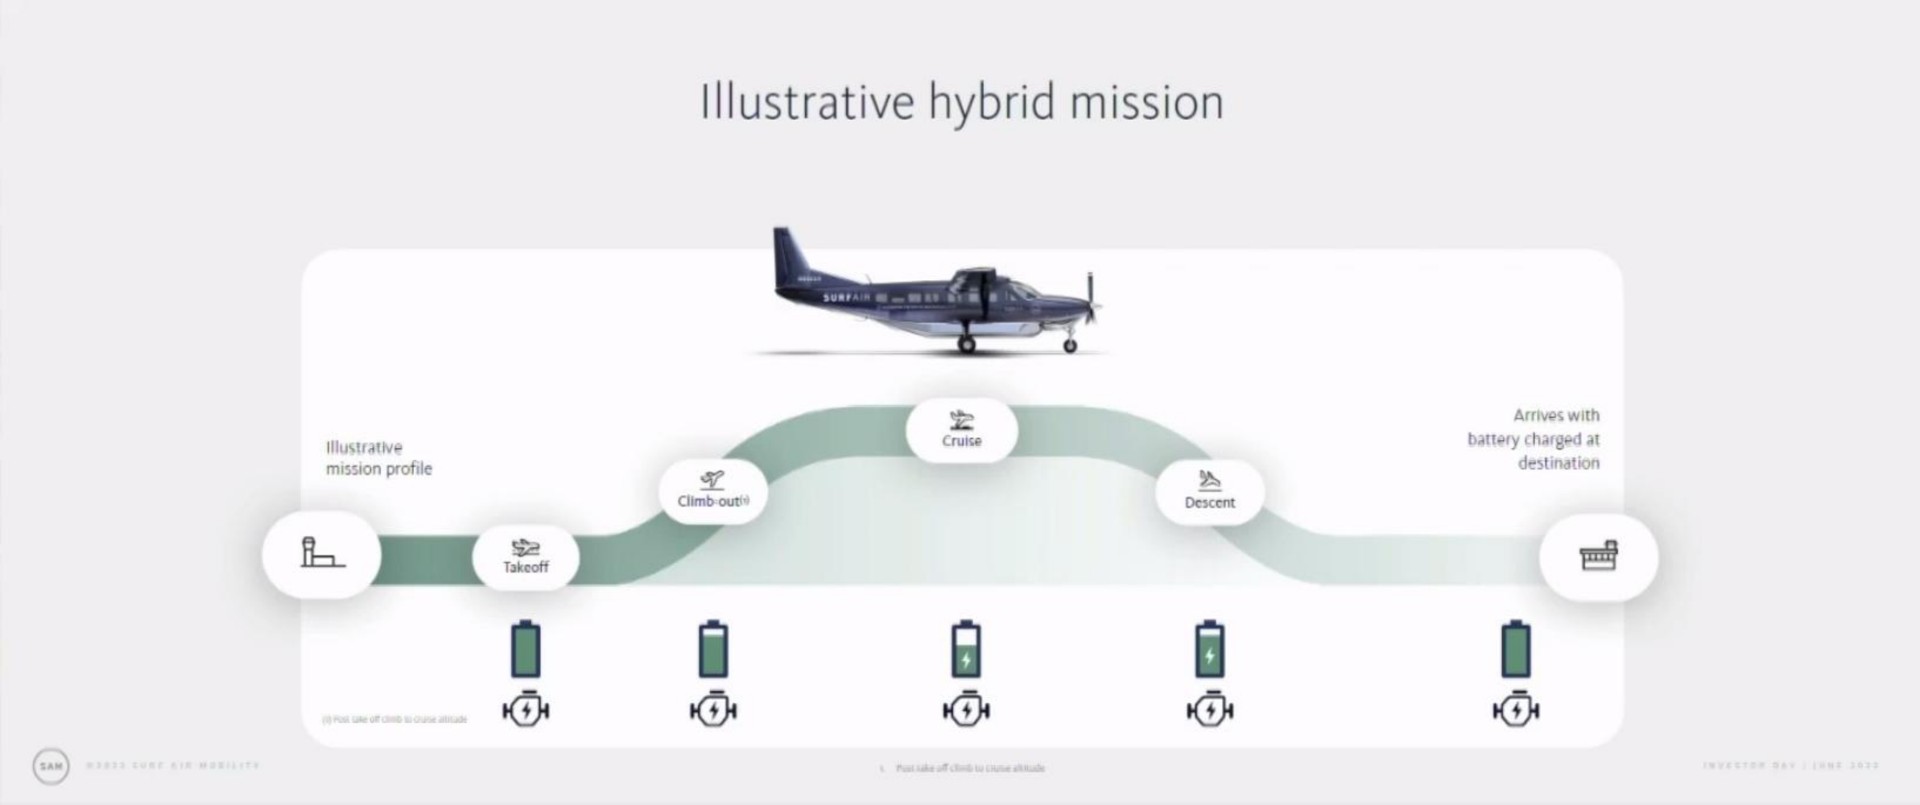 illustrative hybrid mission mission profile am climb out cruise arrives with battery charged at destination i | Surf Air